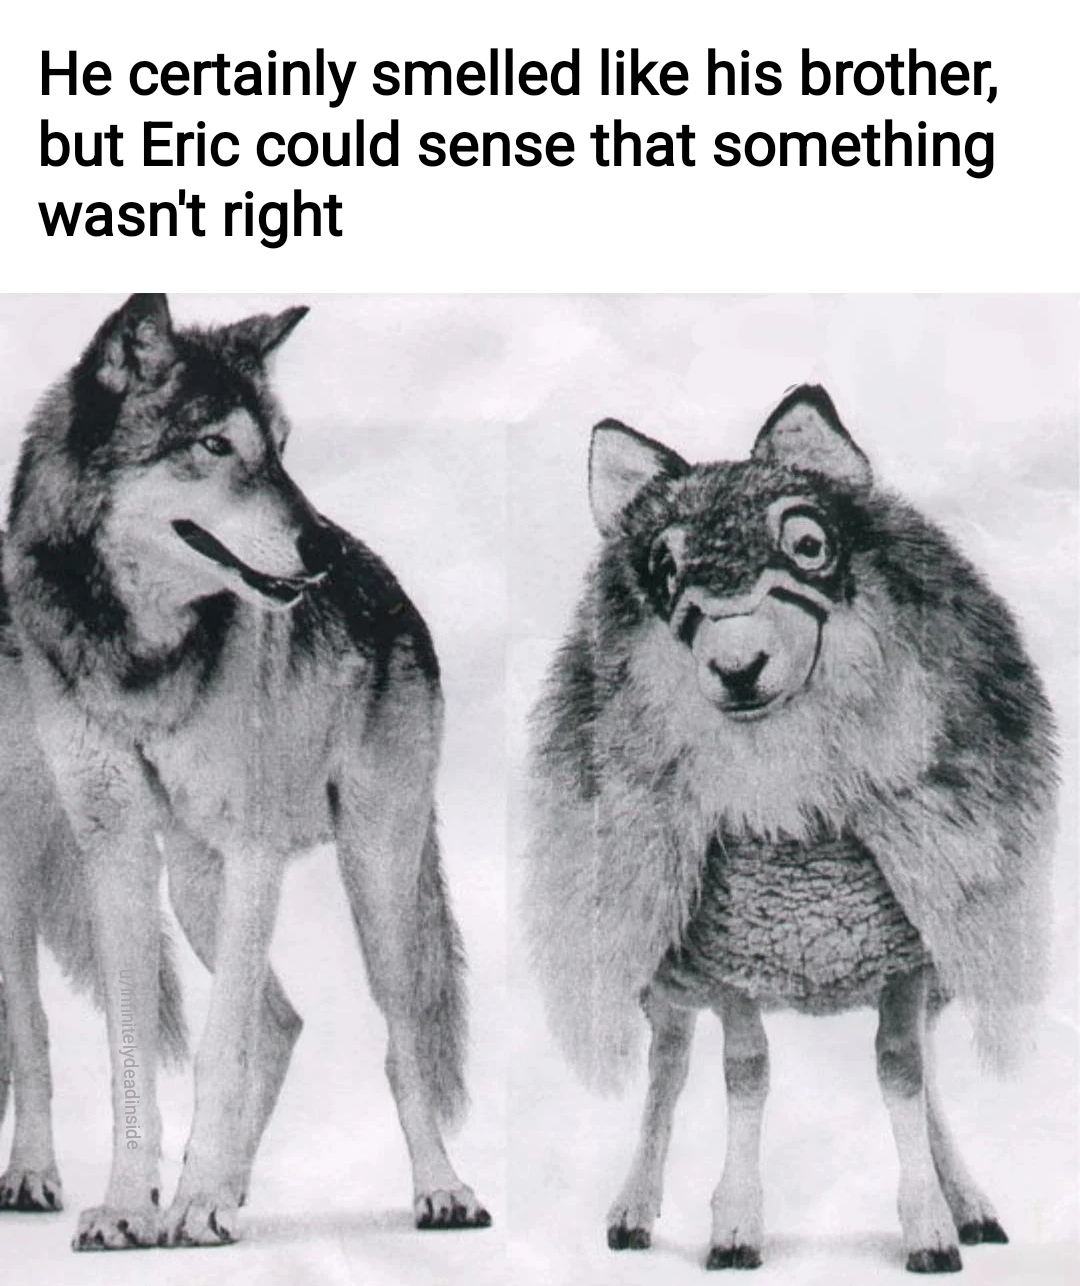 funny memes - He certainly smelled his brother, but Eric could sense that something wasn't right